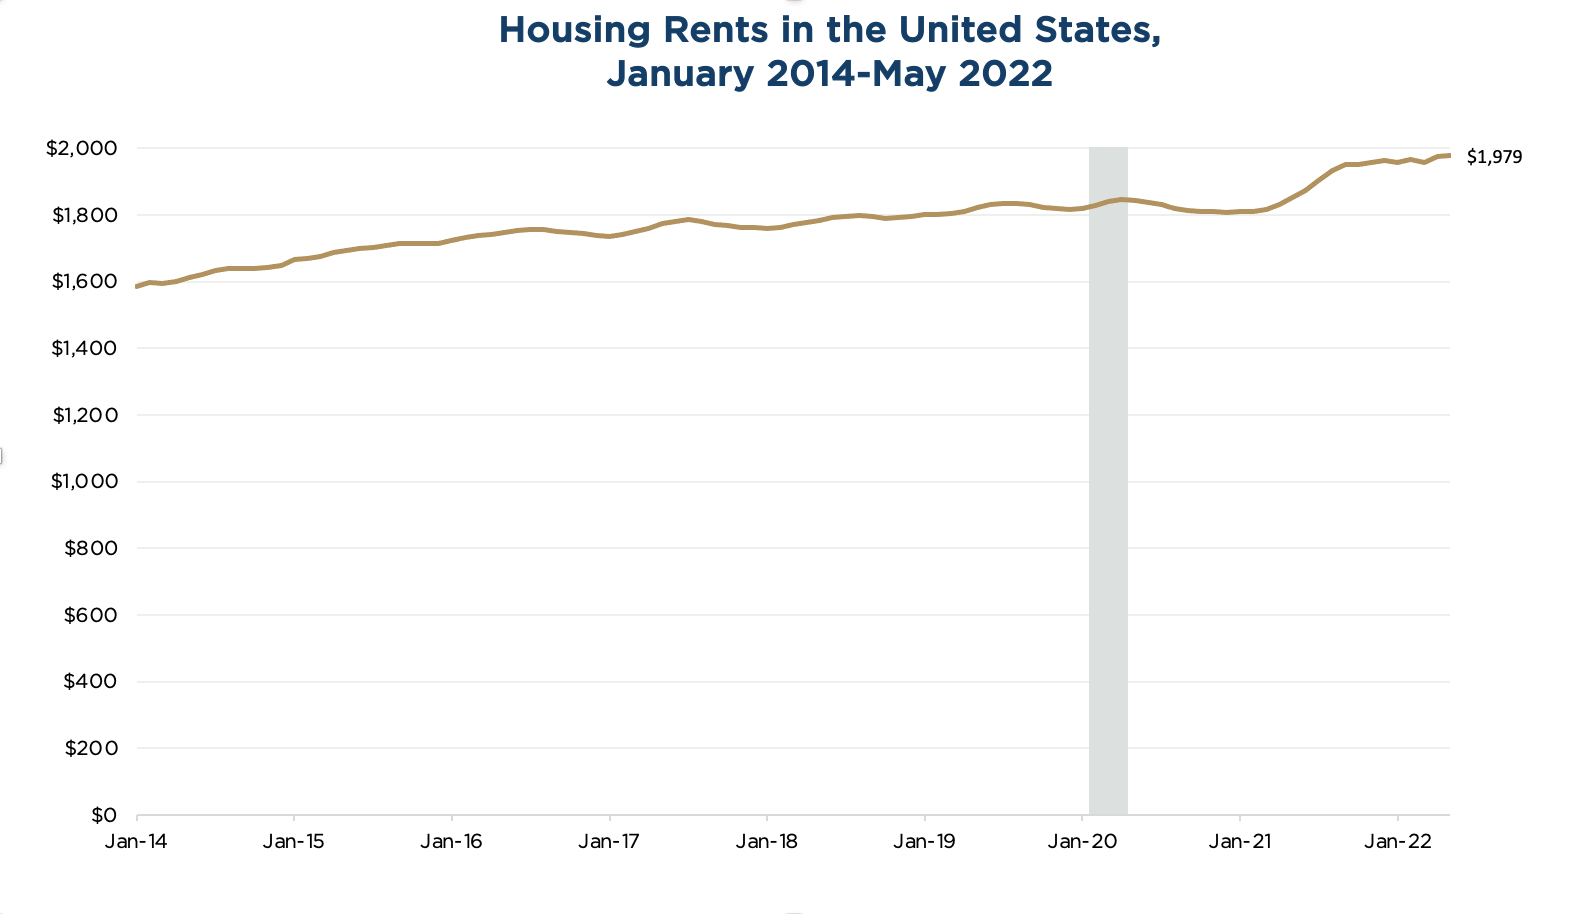 Chart showing how housing rents in the United States have risen every year between January 2014 and May 2022